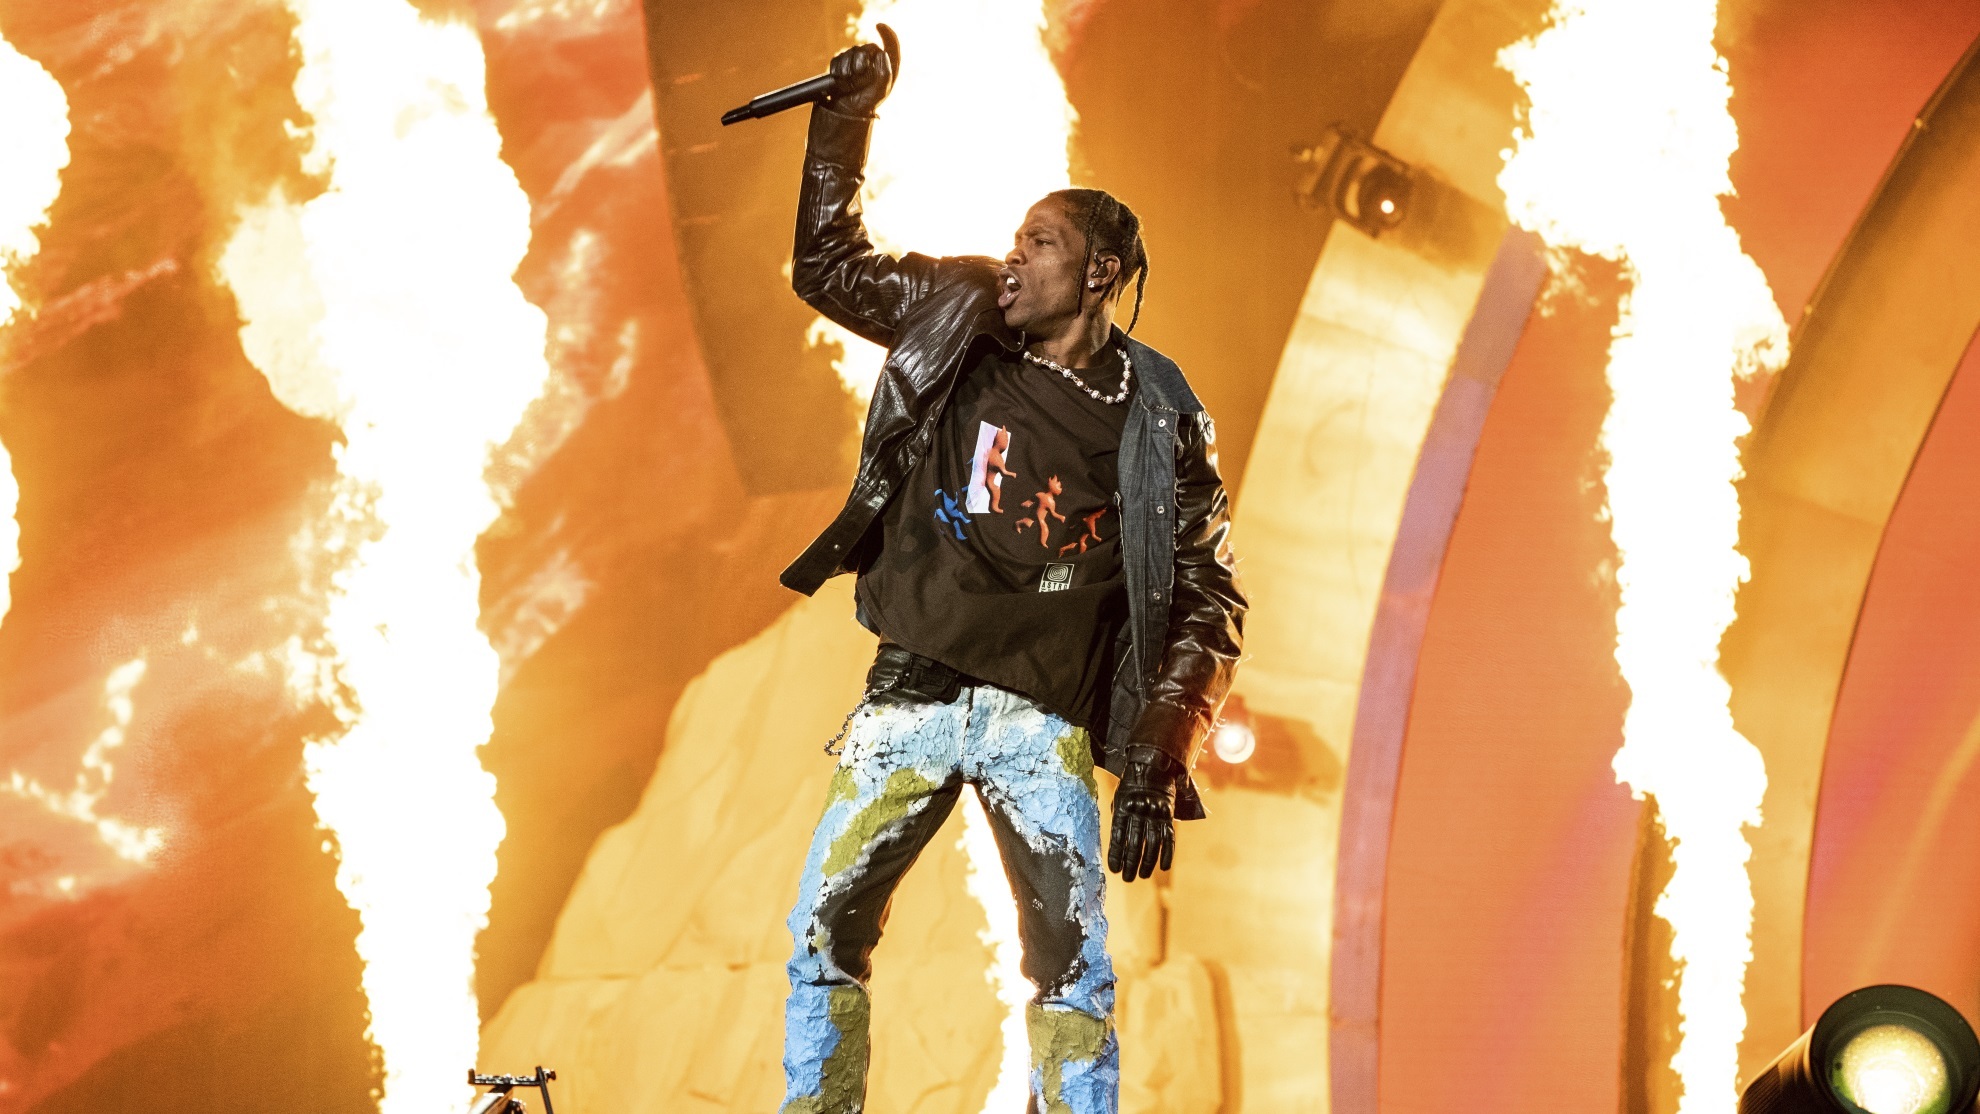 Travis Scott performs at Day 1 of the Astroworld Music Festival at NRG Park on Friday.